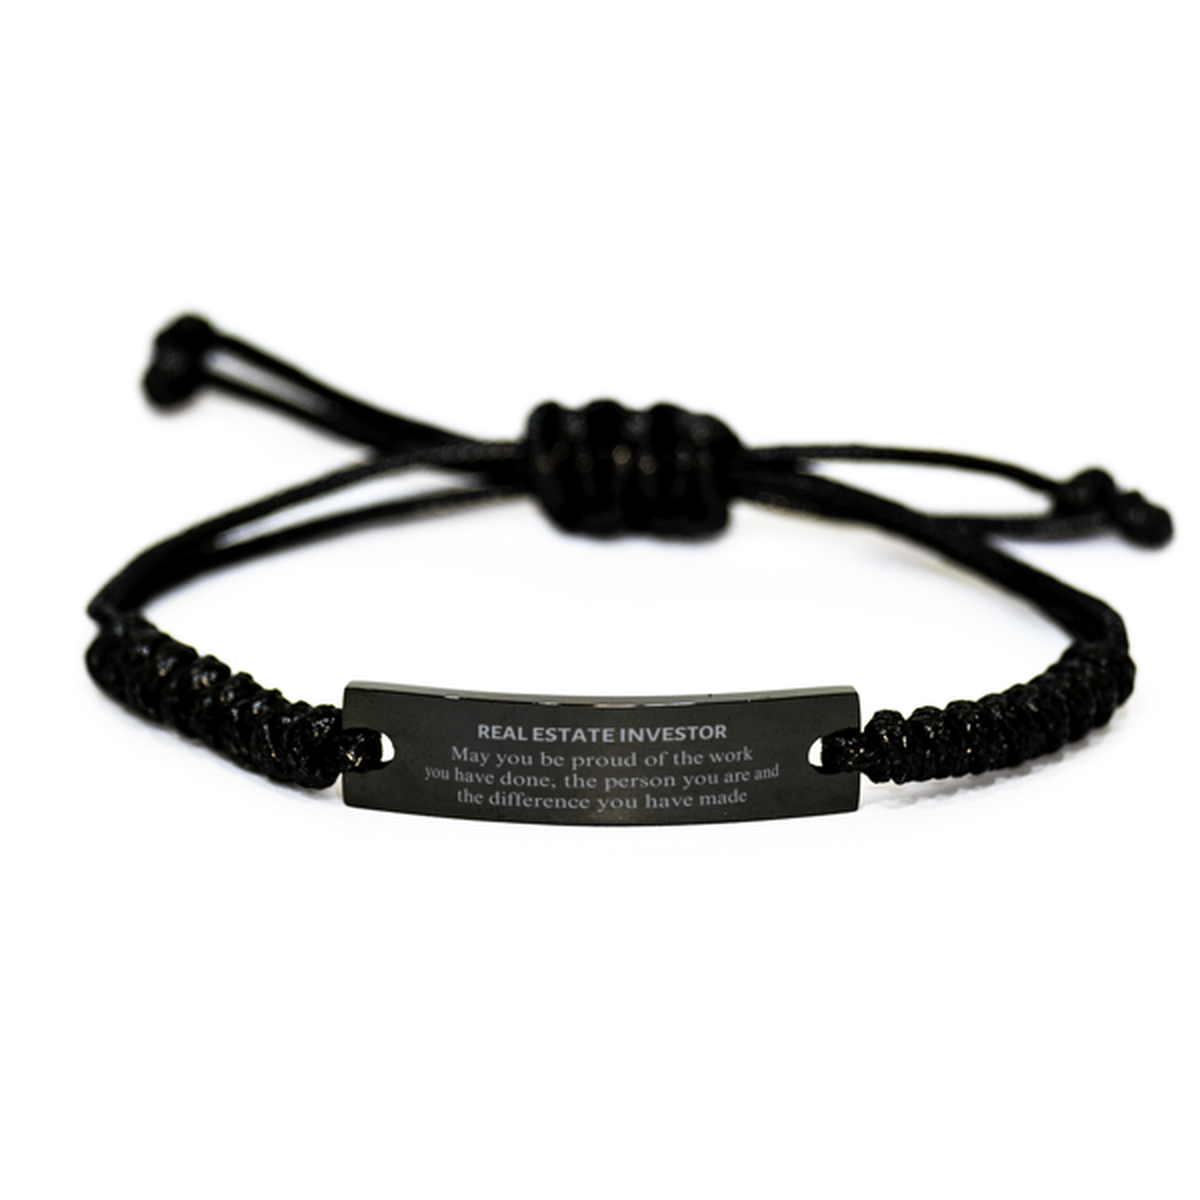 Real Estate Investor May you be proud of the work you have done, Retirement Real Estate Investor Black Rope Bracelet for Colleague Appreciation Gifts Amazing for Real Estate Investor